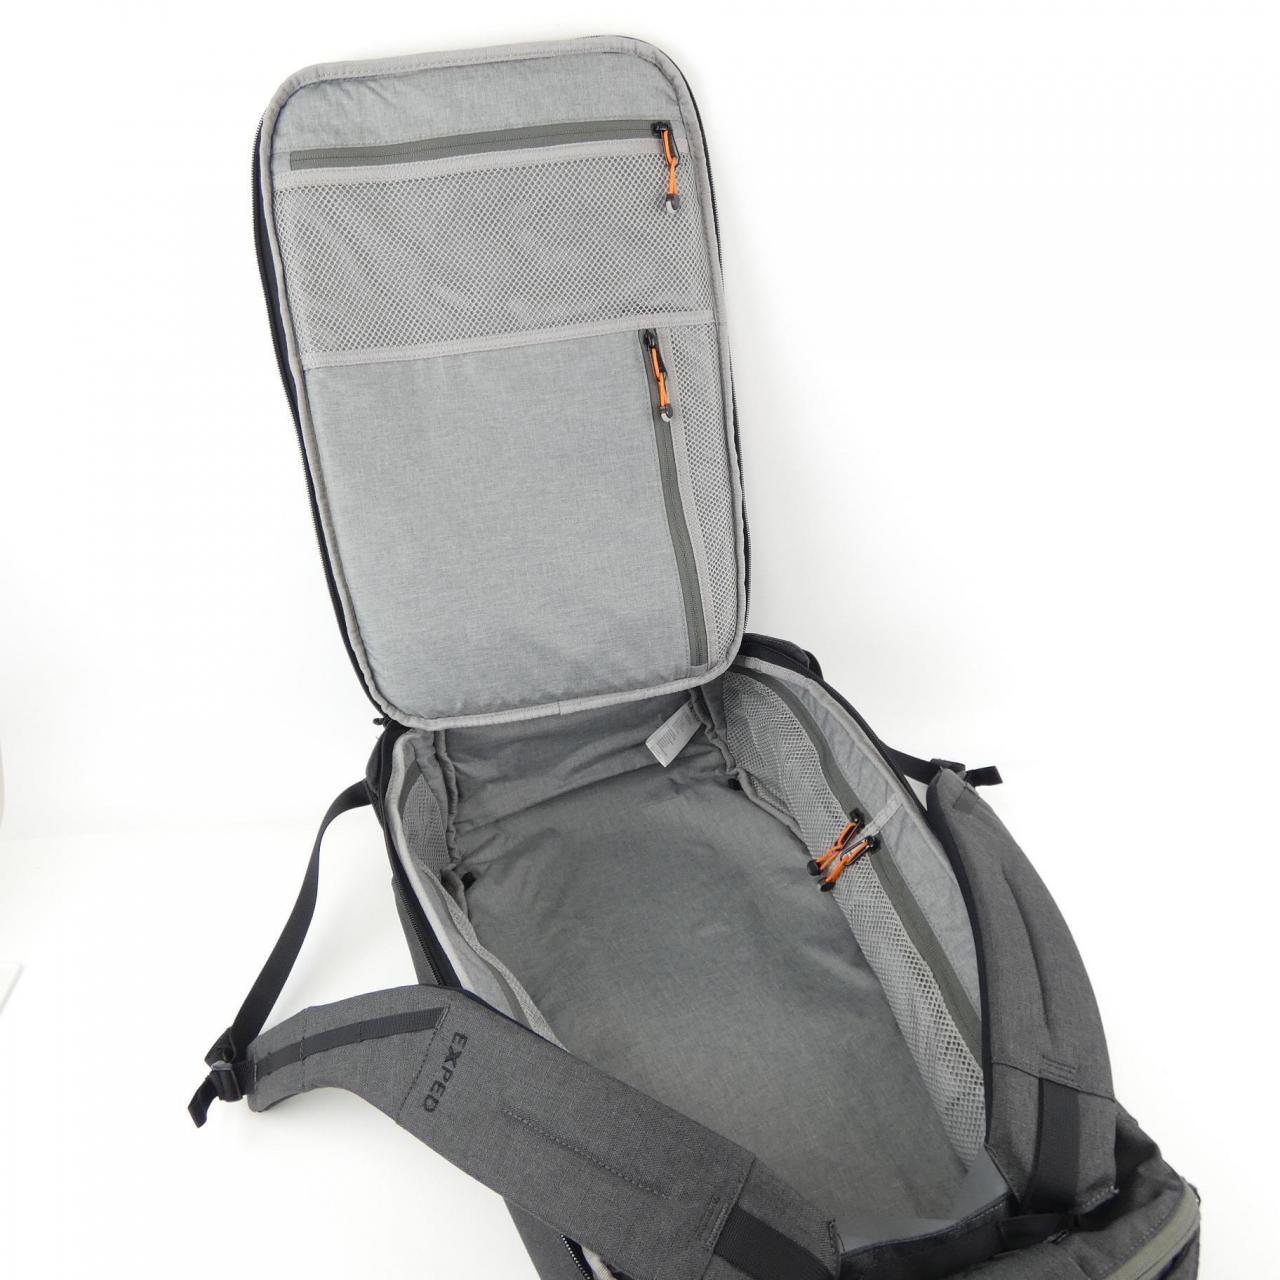 EXPED BACKPACK